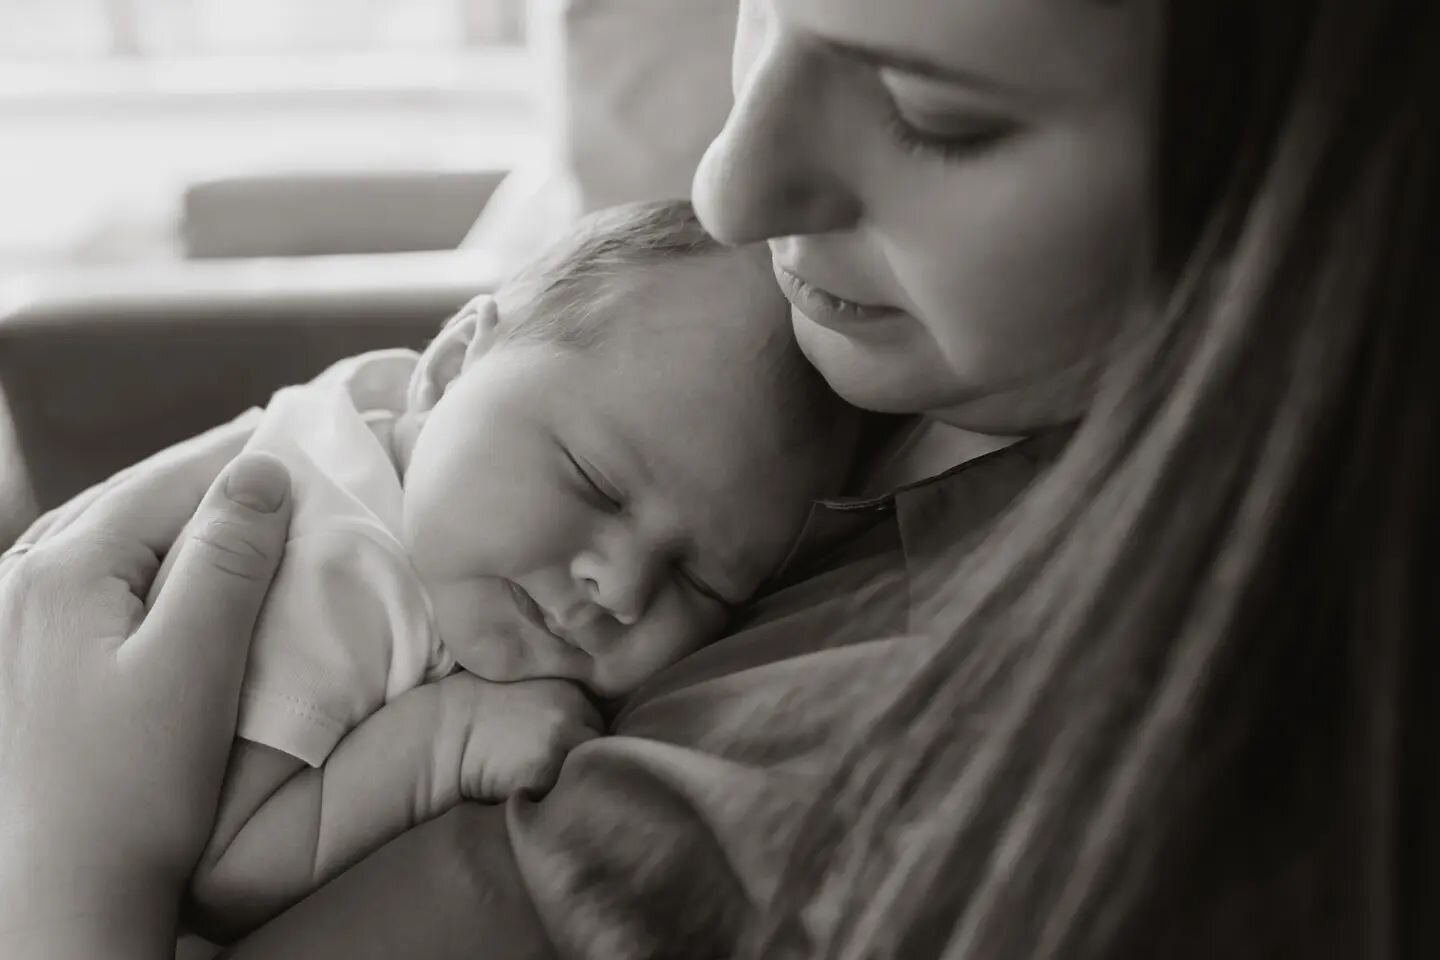 Not had a B&amp;W post on the grid for a while, I just love this one of baby Luca snuggle with his mam Ellie 🥰